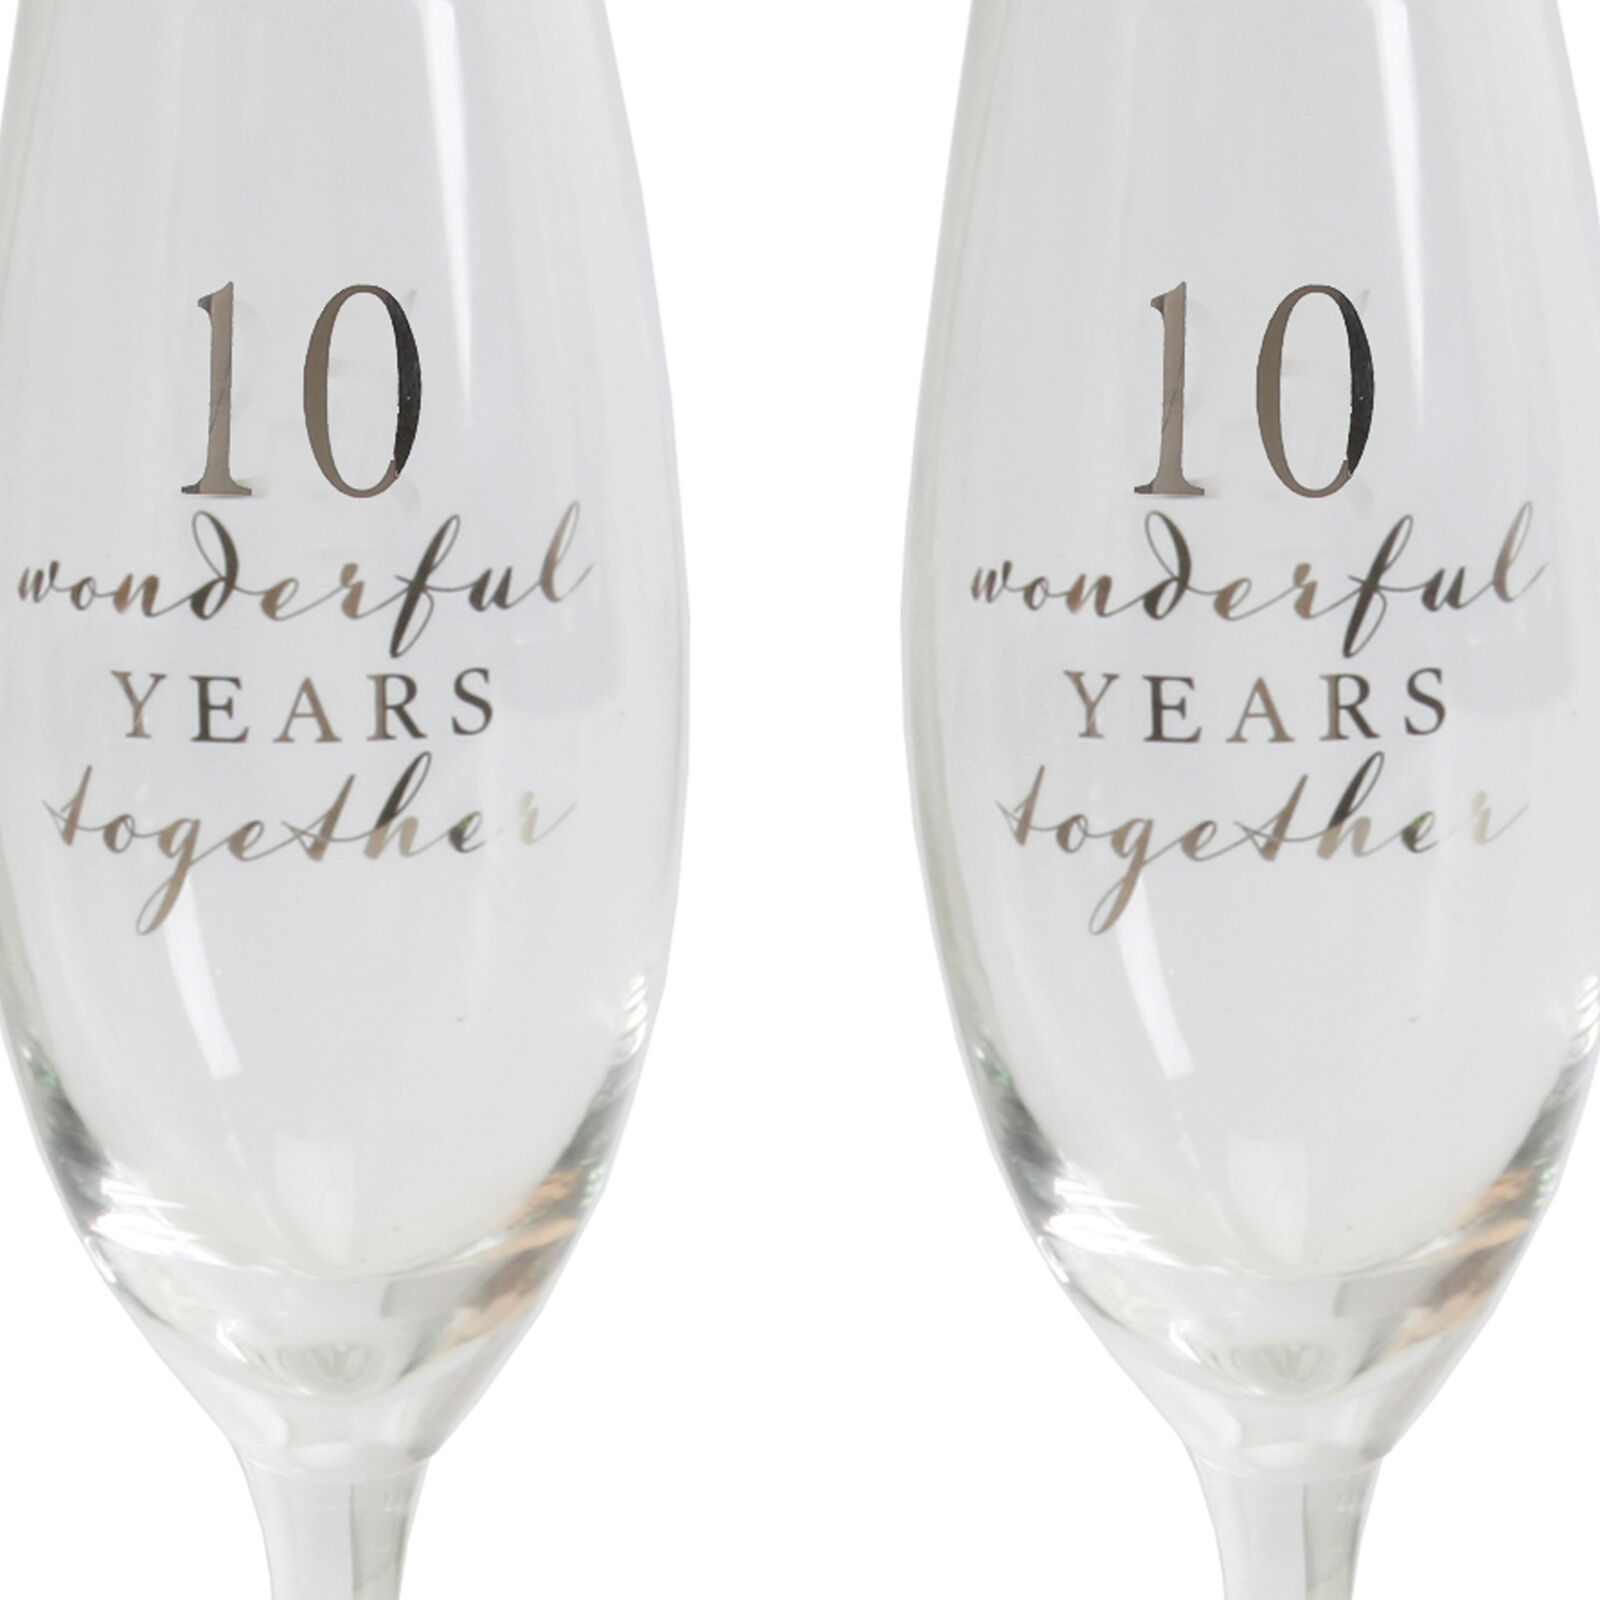 Amore Set of 2 Gift Boxed Champagne Flutes - 10th Anniversary